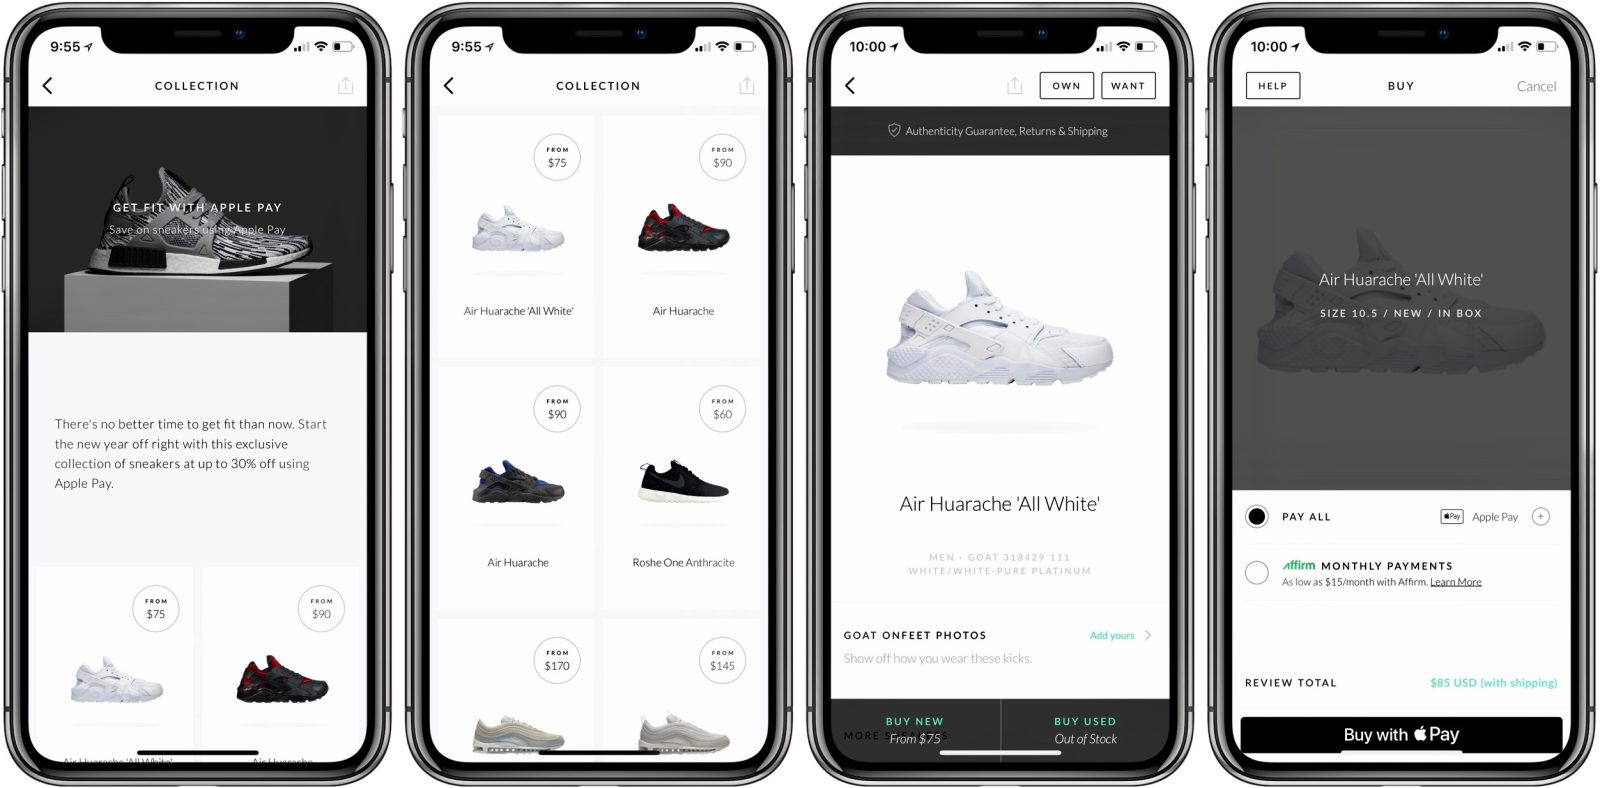 Apple Pay Promotion Brings Up To 30 Off Sneakers Through Goat App